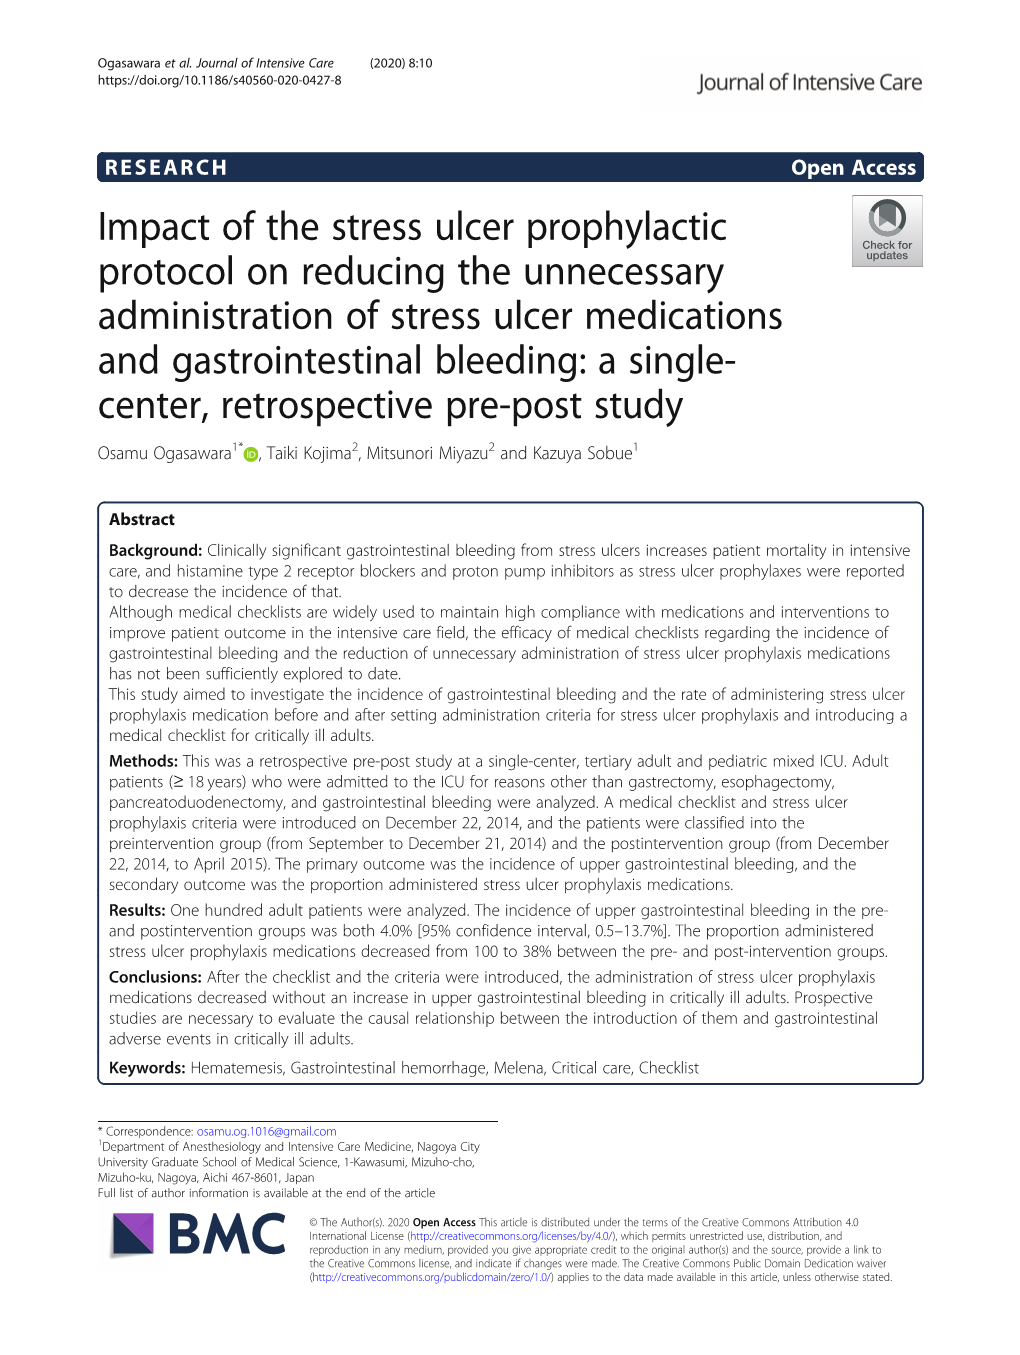 Impact of the Stress Ulcer Prophylactic Protocol on Reducing The